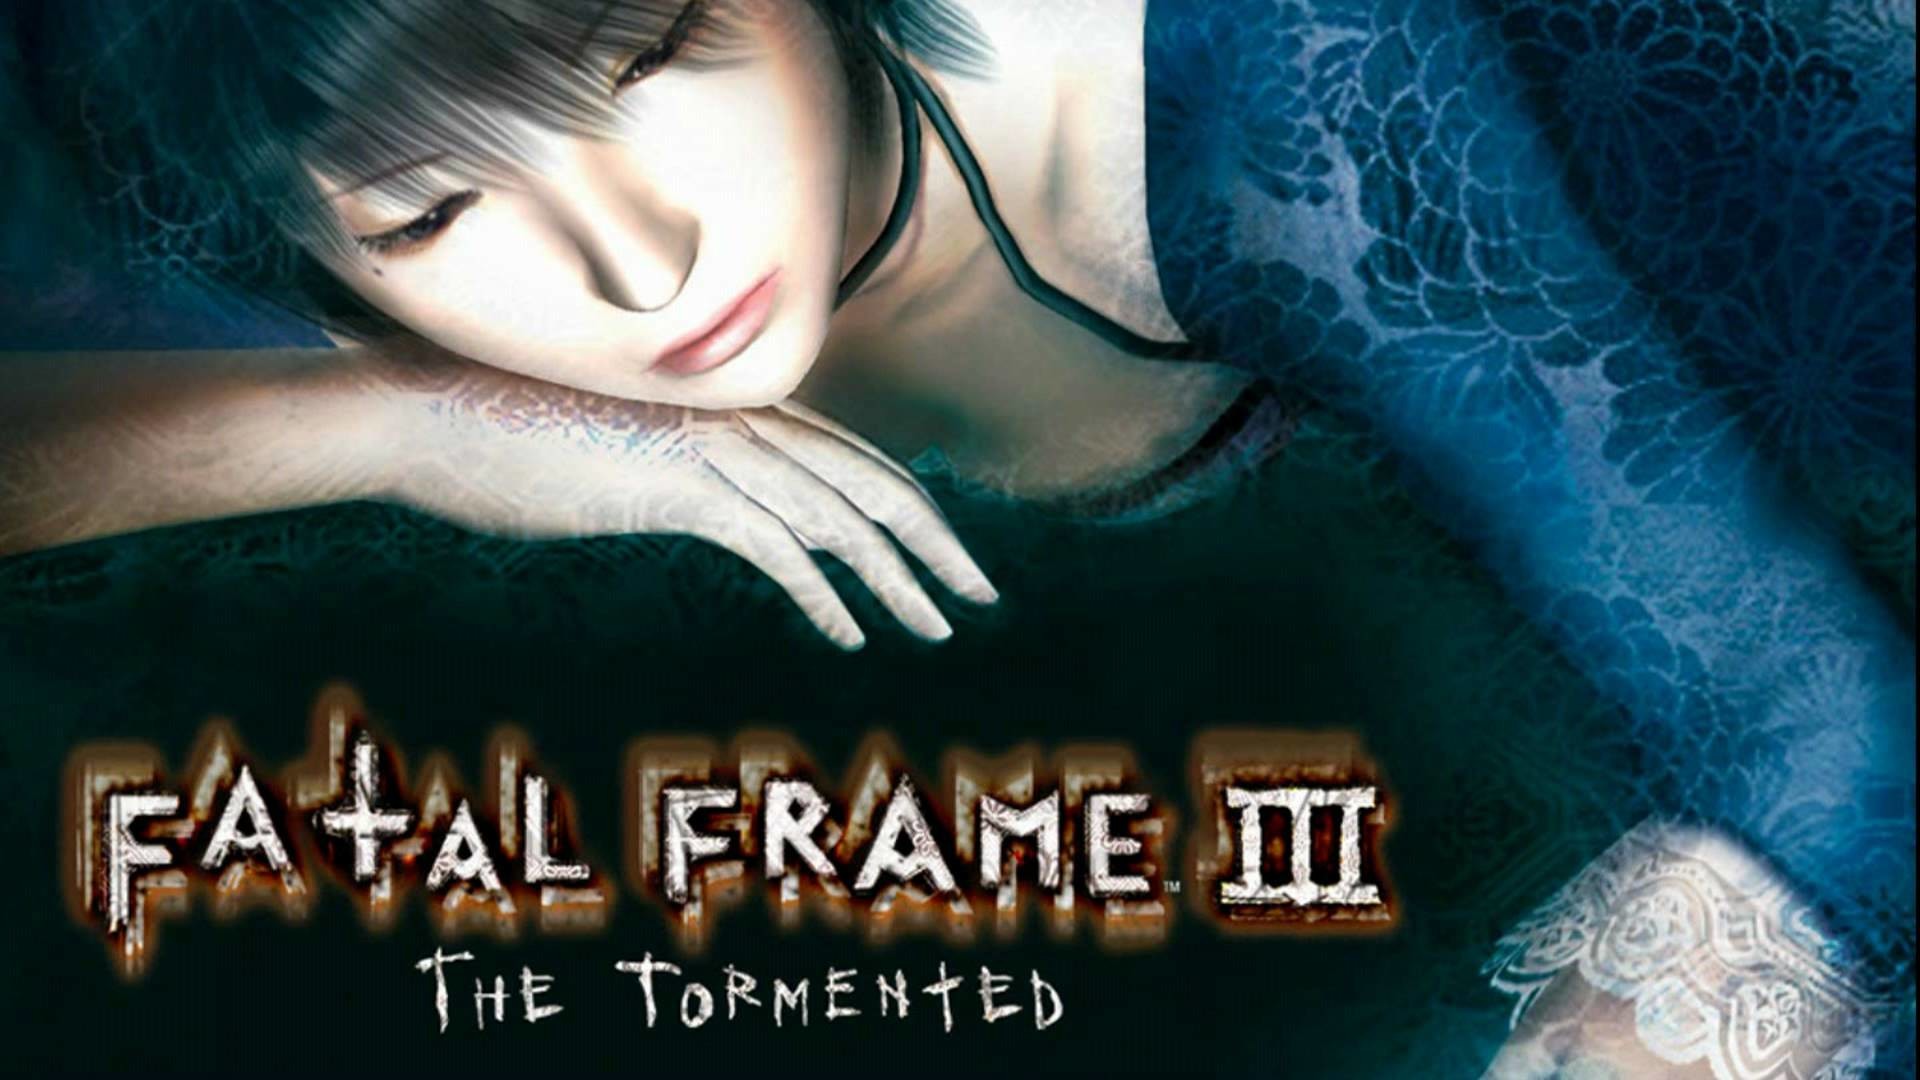 1920x1080 Fatal Frame 3 Soundtrack: 01 - The Tormented